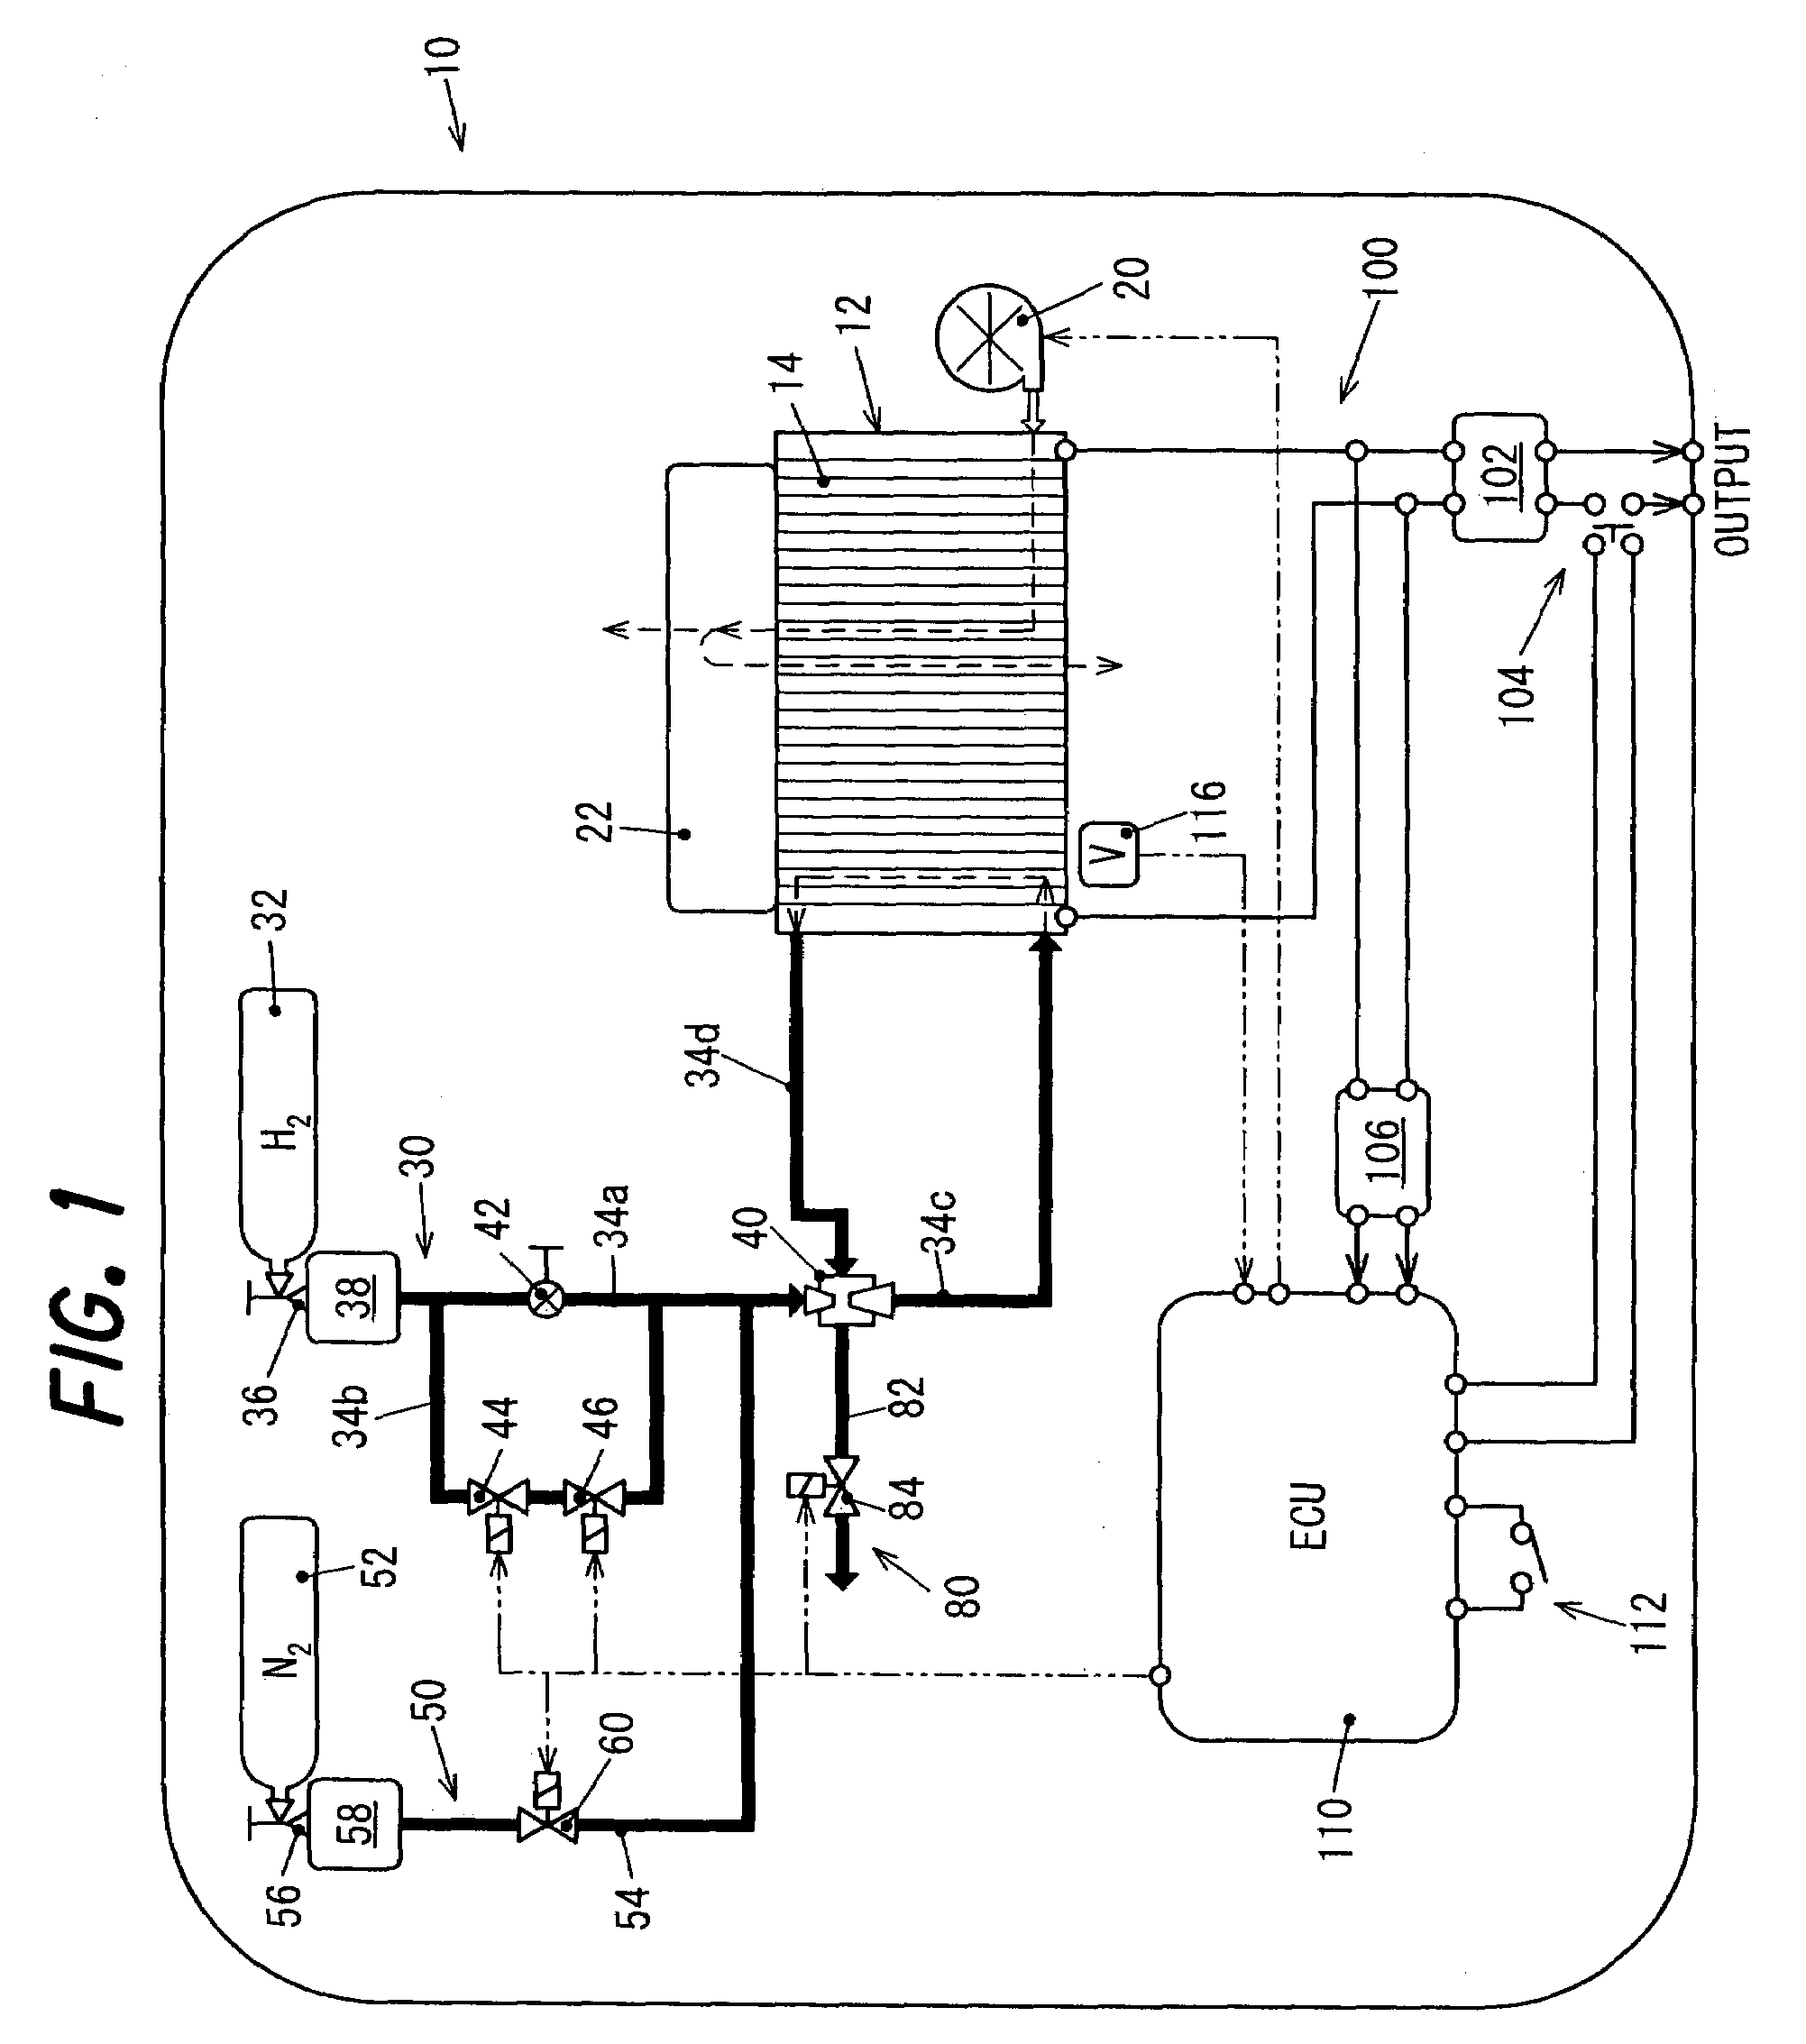 Air supply apparatus for a fuel cell